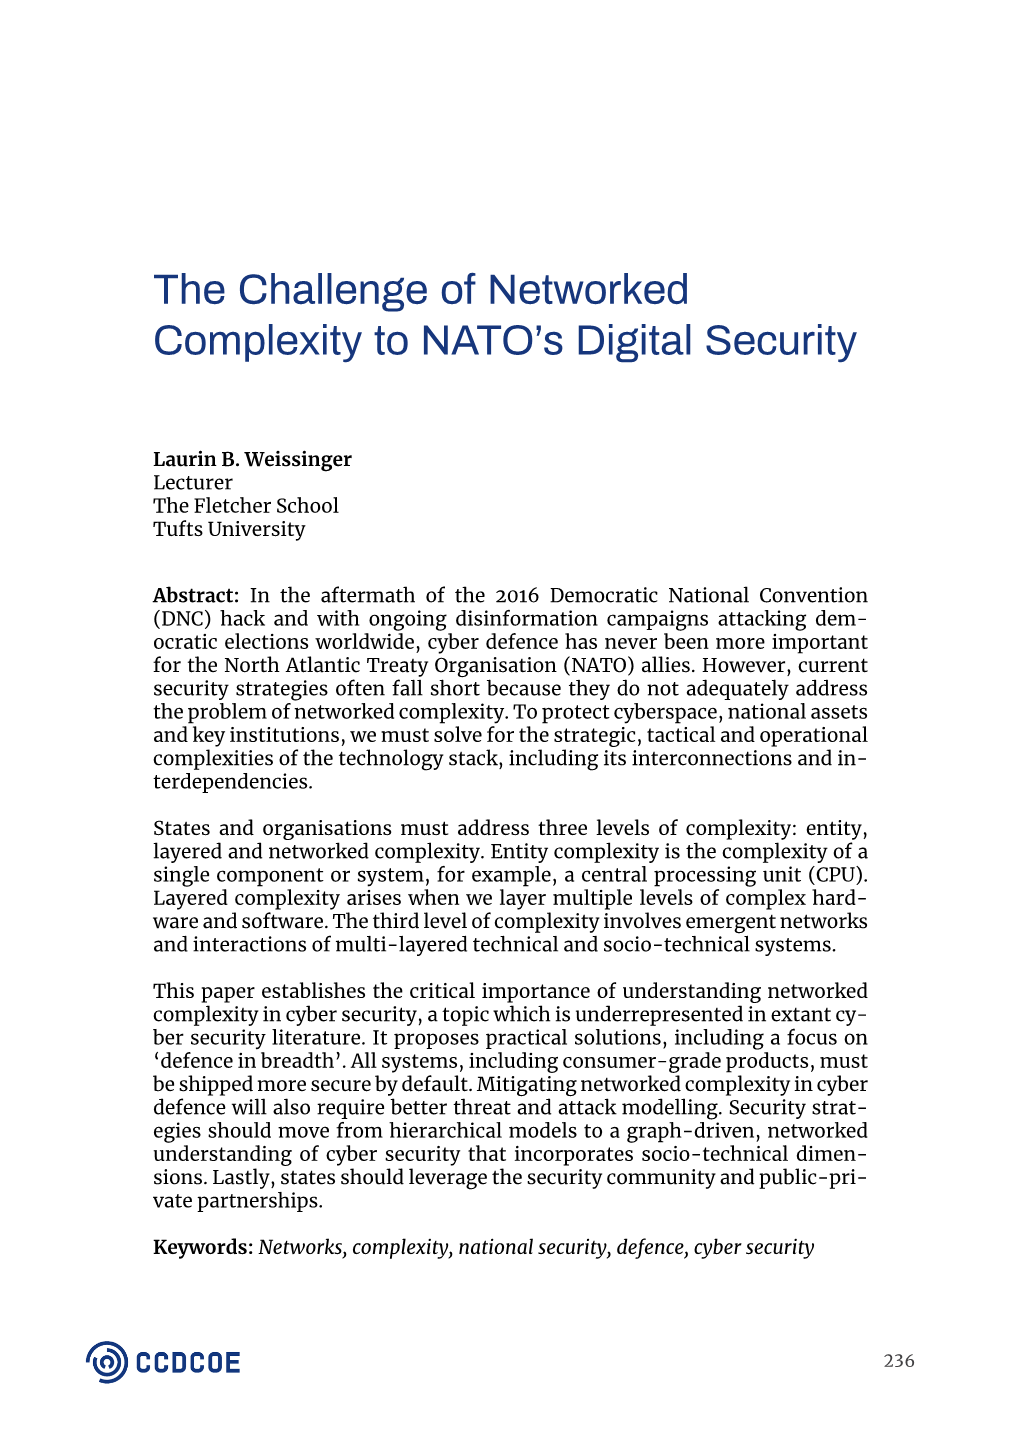 The Challenge of Networked Complexity to NATO's Digital Security